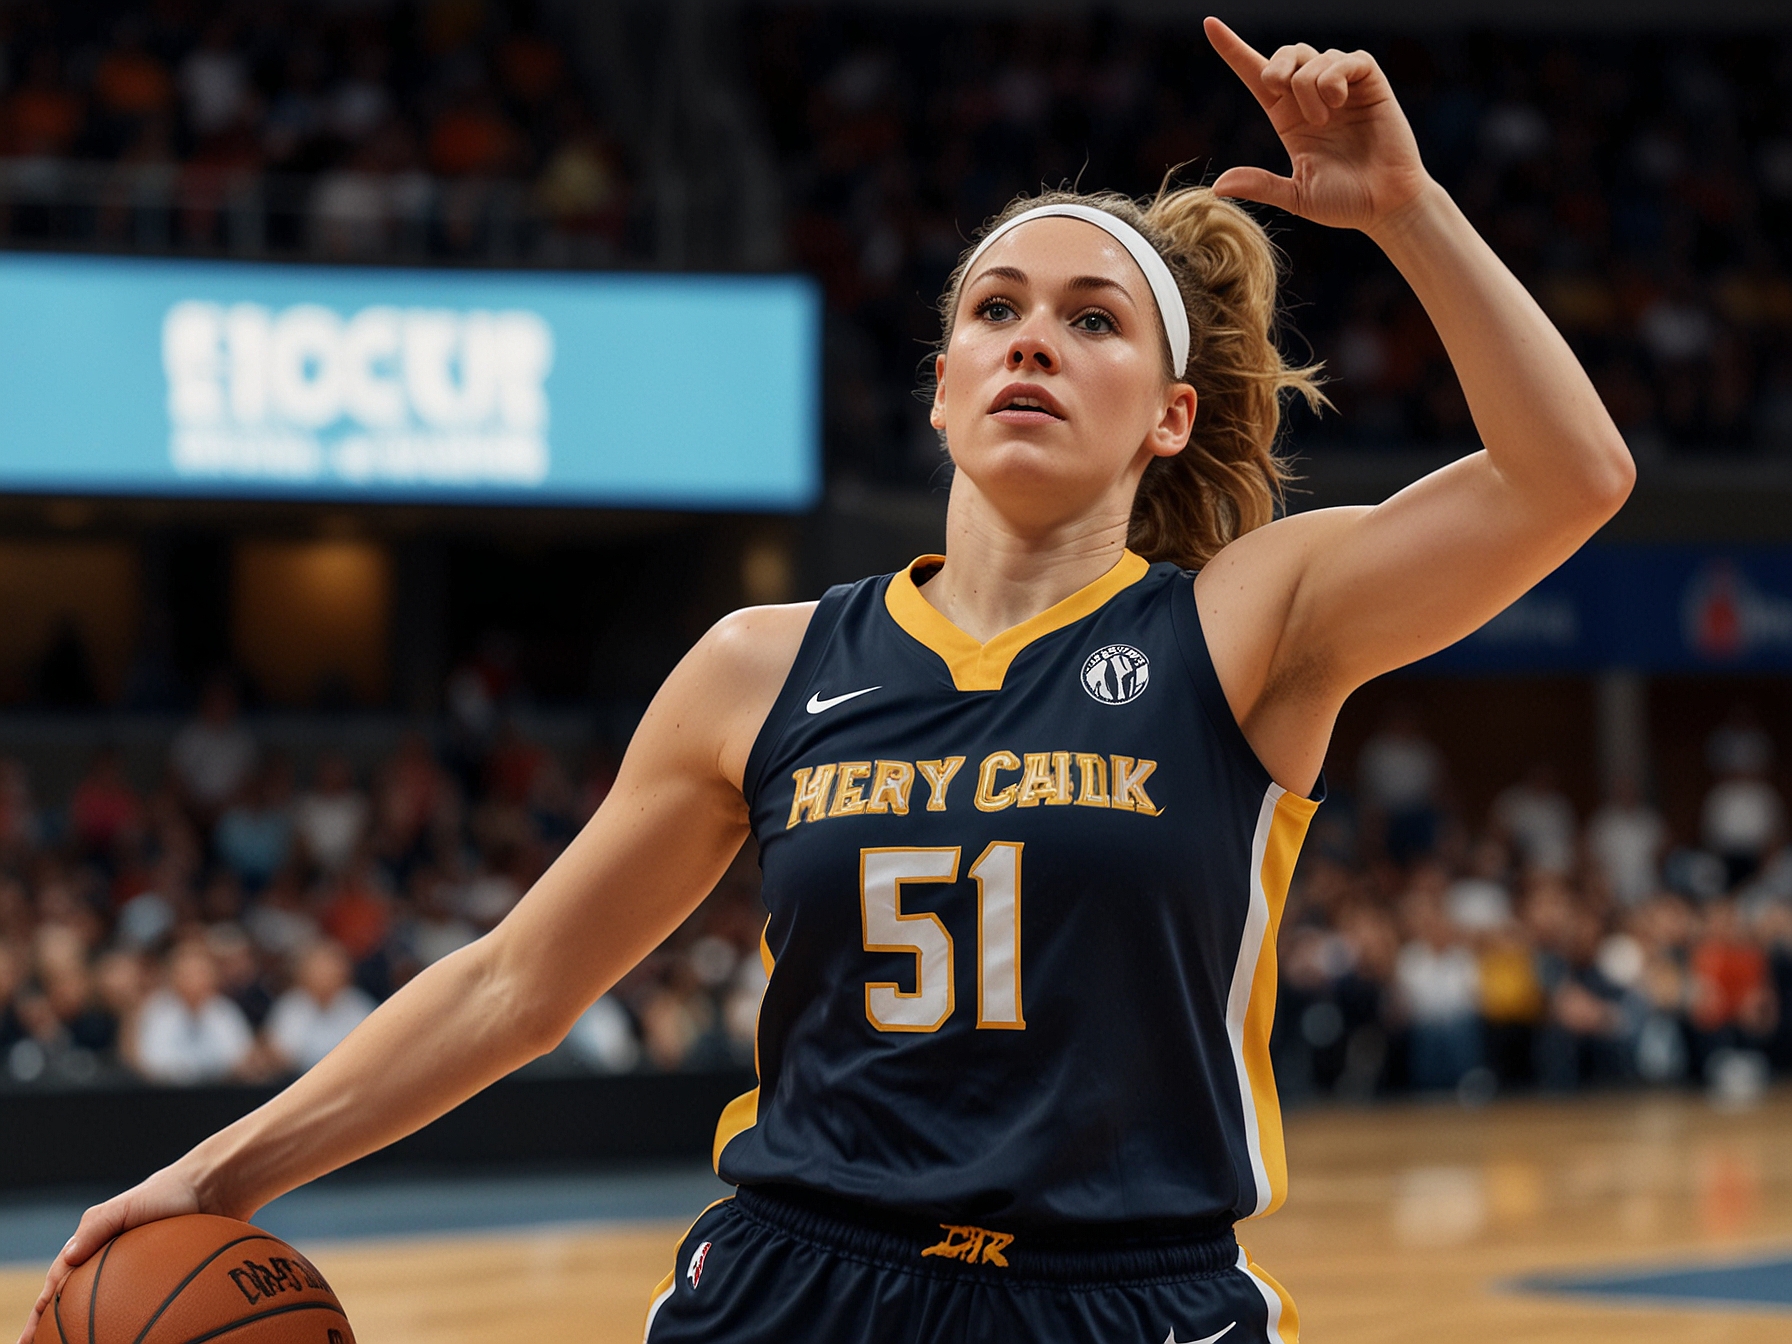 Caitlin Clark, in her team's uniform, makes a powerful shot from the three-point line during a WNBA game, showcasing her impressive scoring ability and dominance on the court.